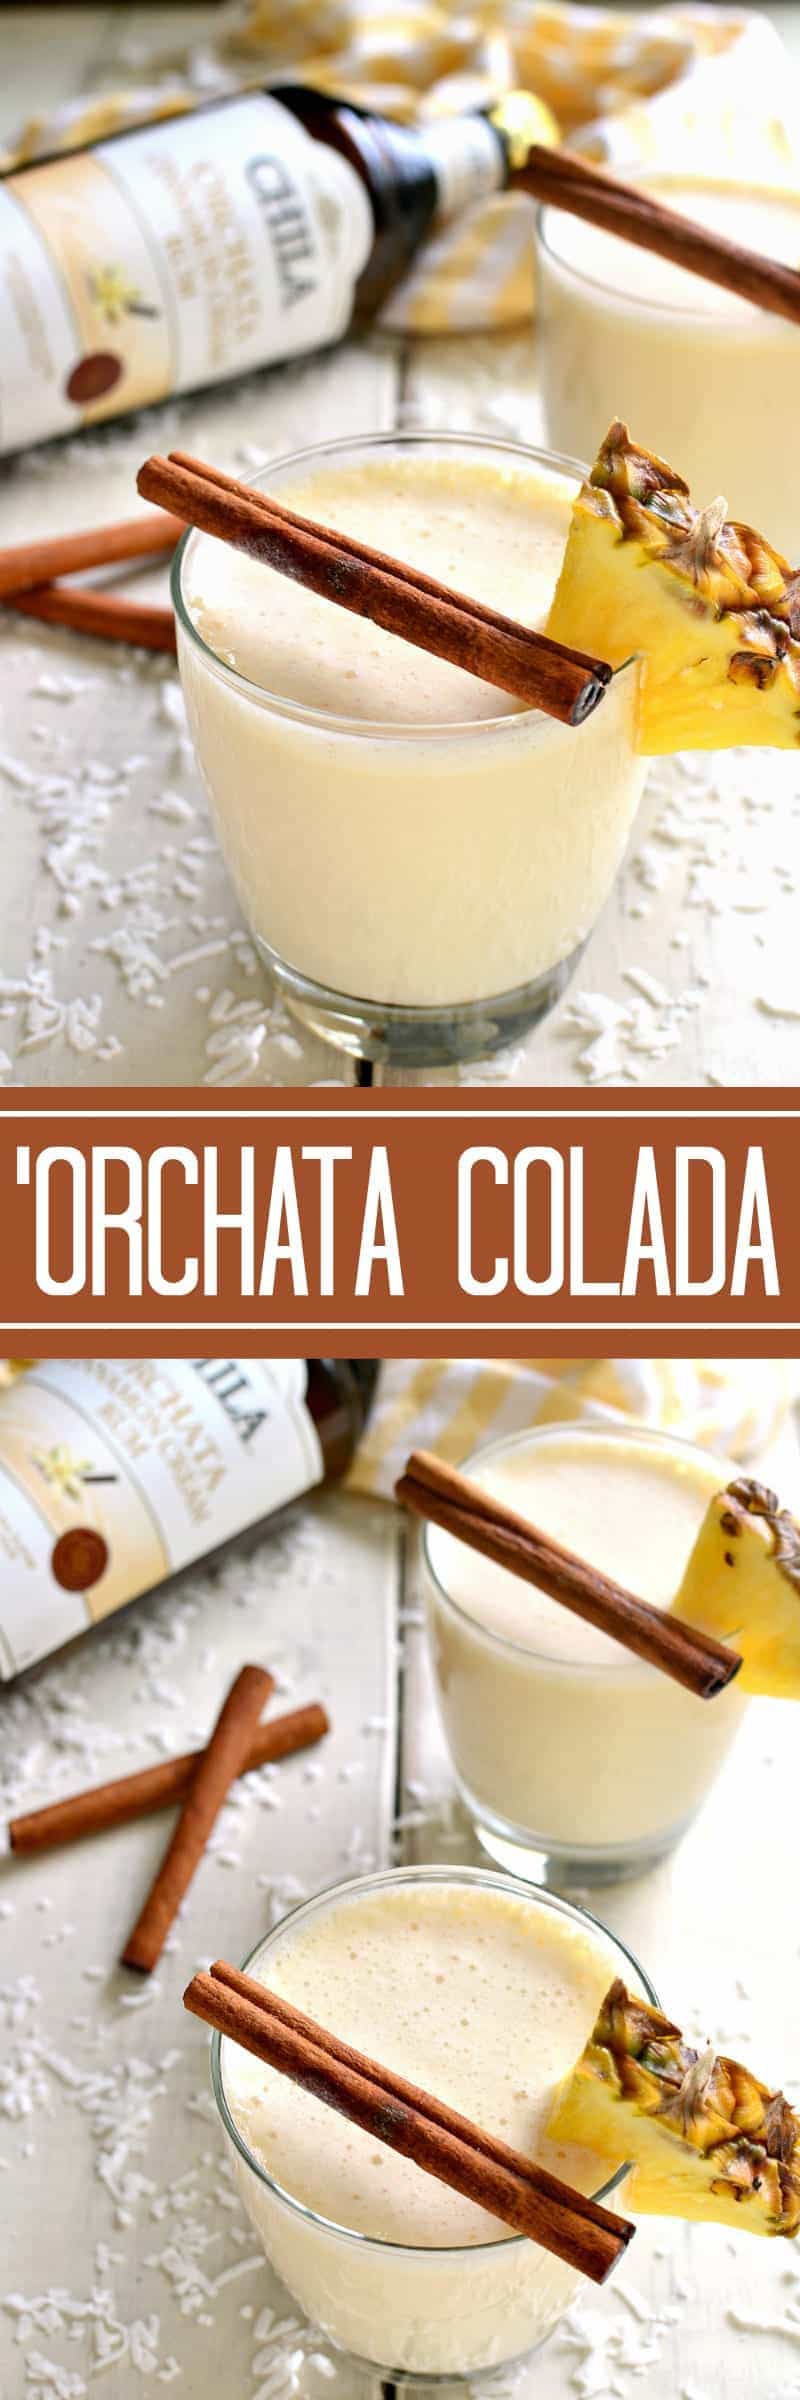 'Orchata Coladas combine the classic flavors of piña coladas with sweet Cinnamon Cream Rum in a drink that's creamy, delicious, and perfect for summer!